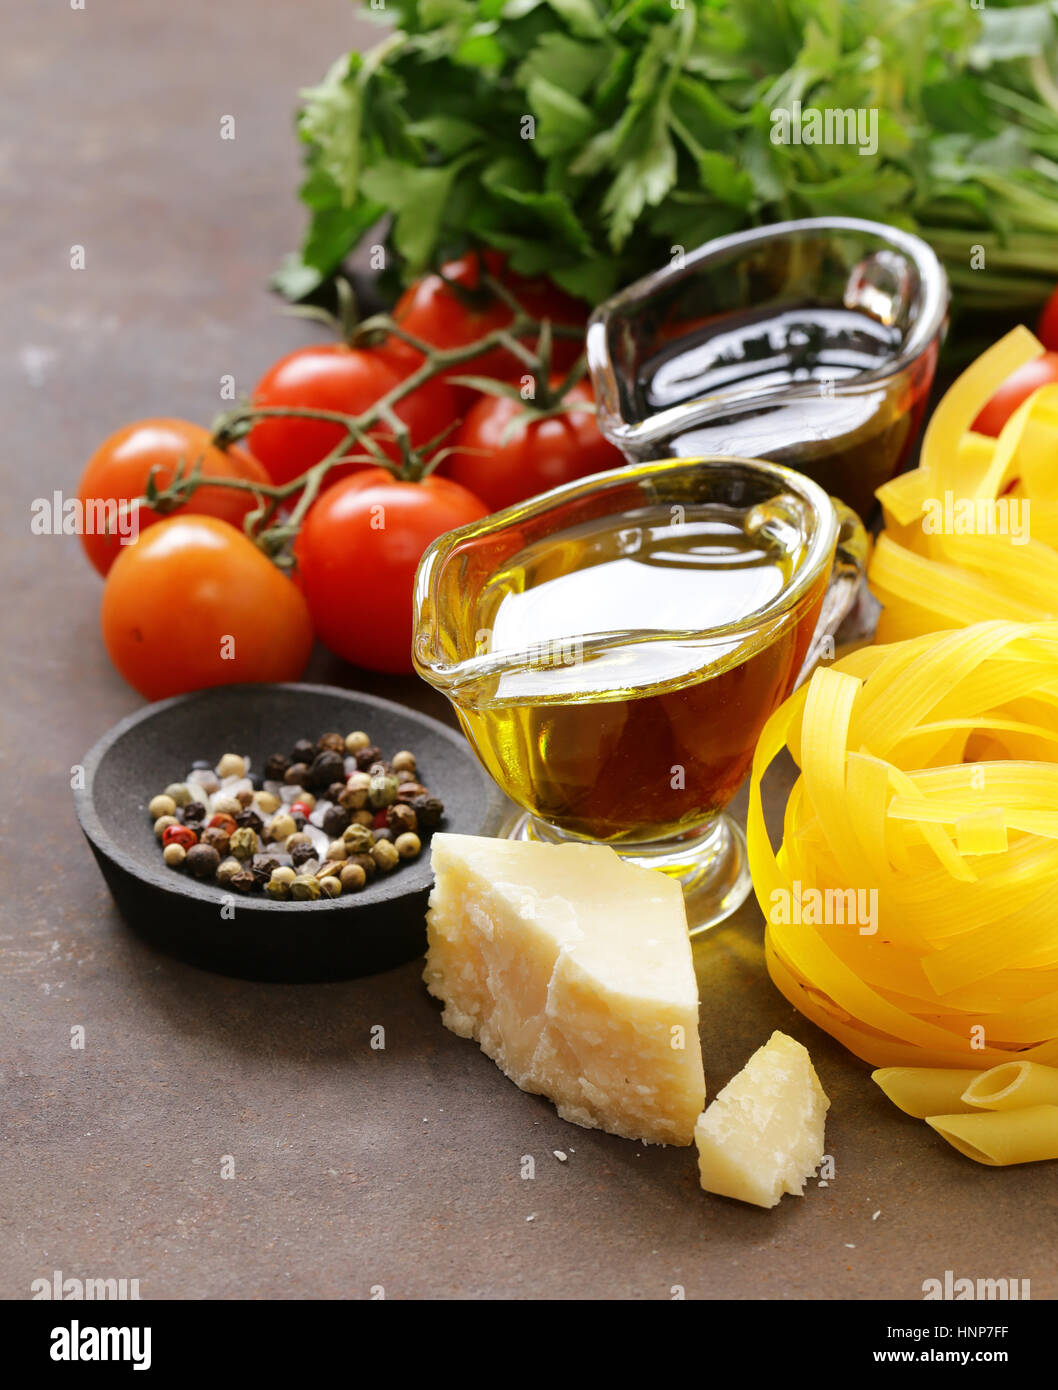 Italian food ingredients - vegetables, olive oil, spices and pasta Stock Photo